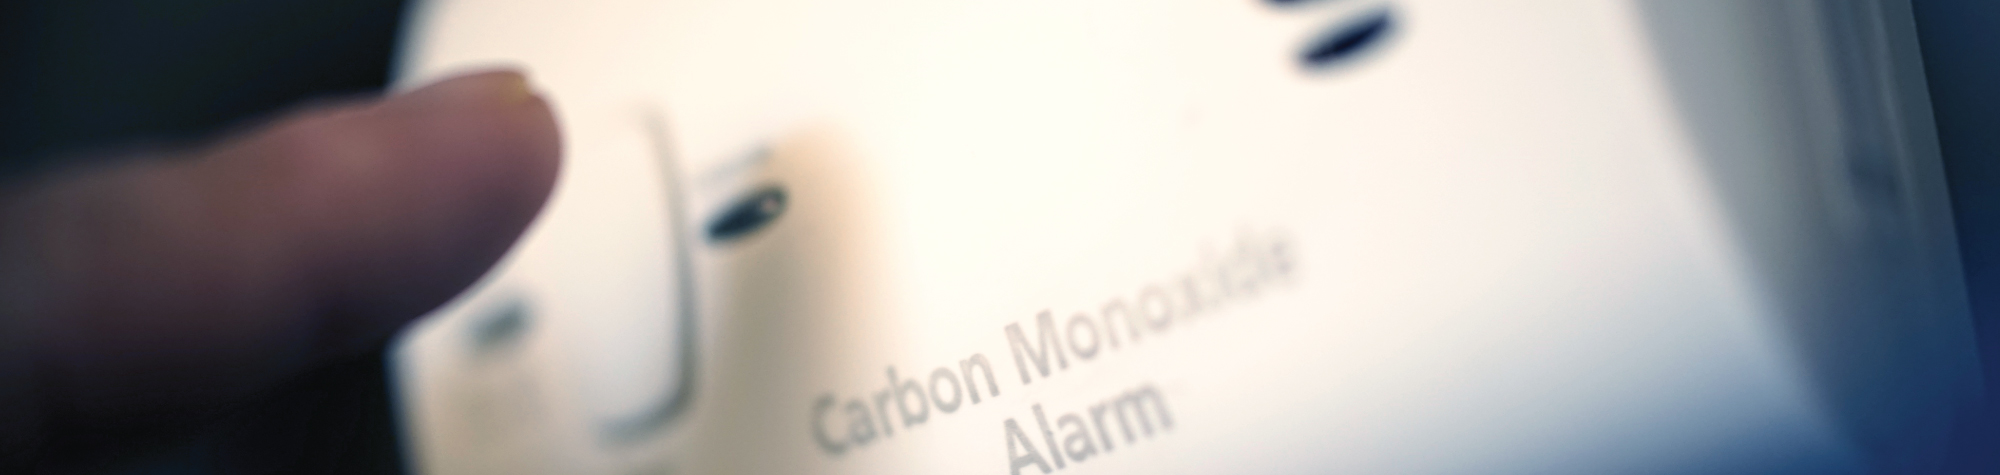 Protect Your Family from Deadly Carbon Monoxide This Winter